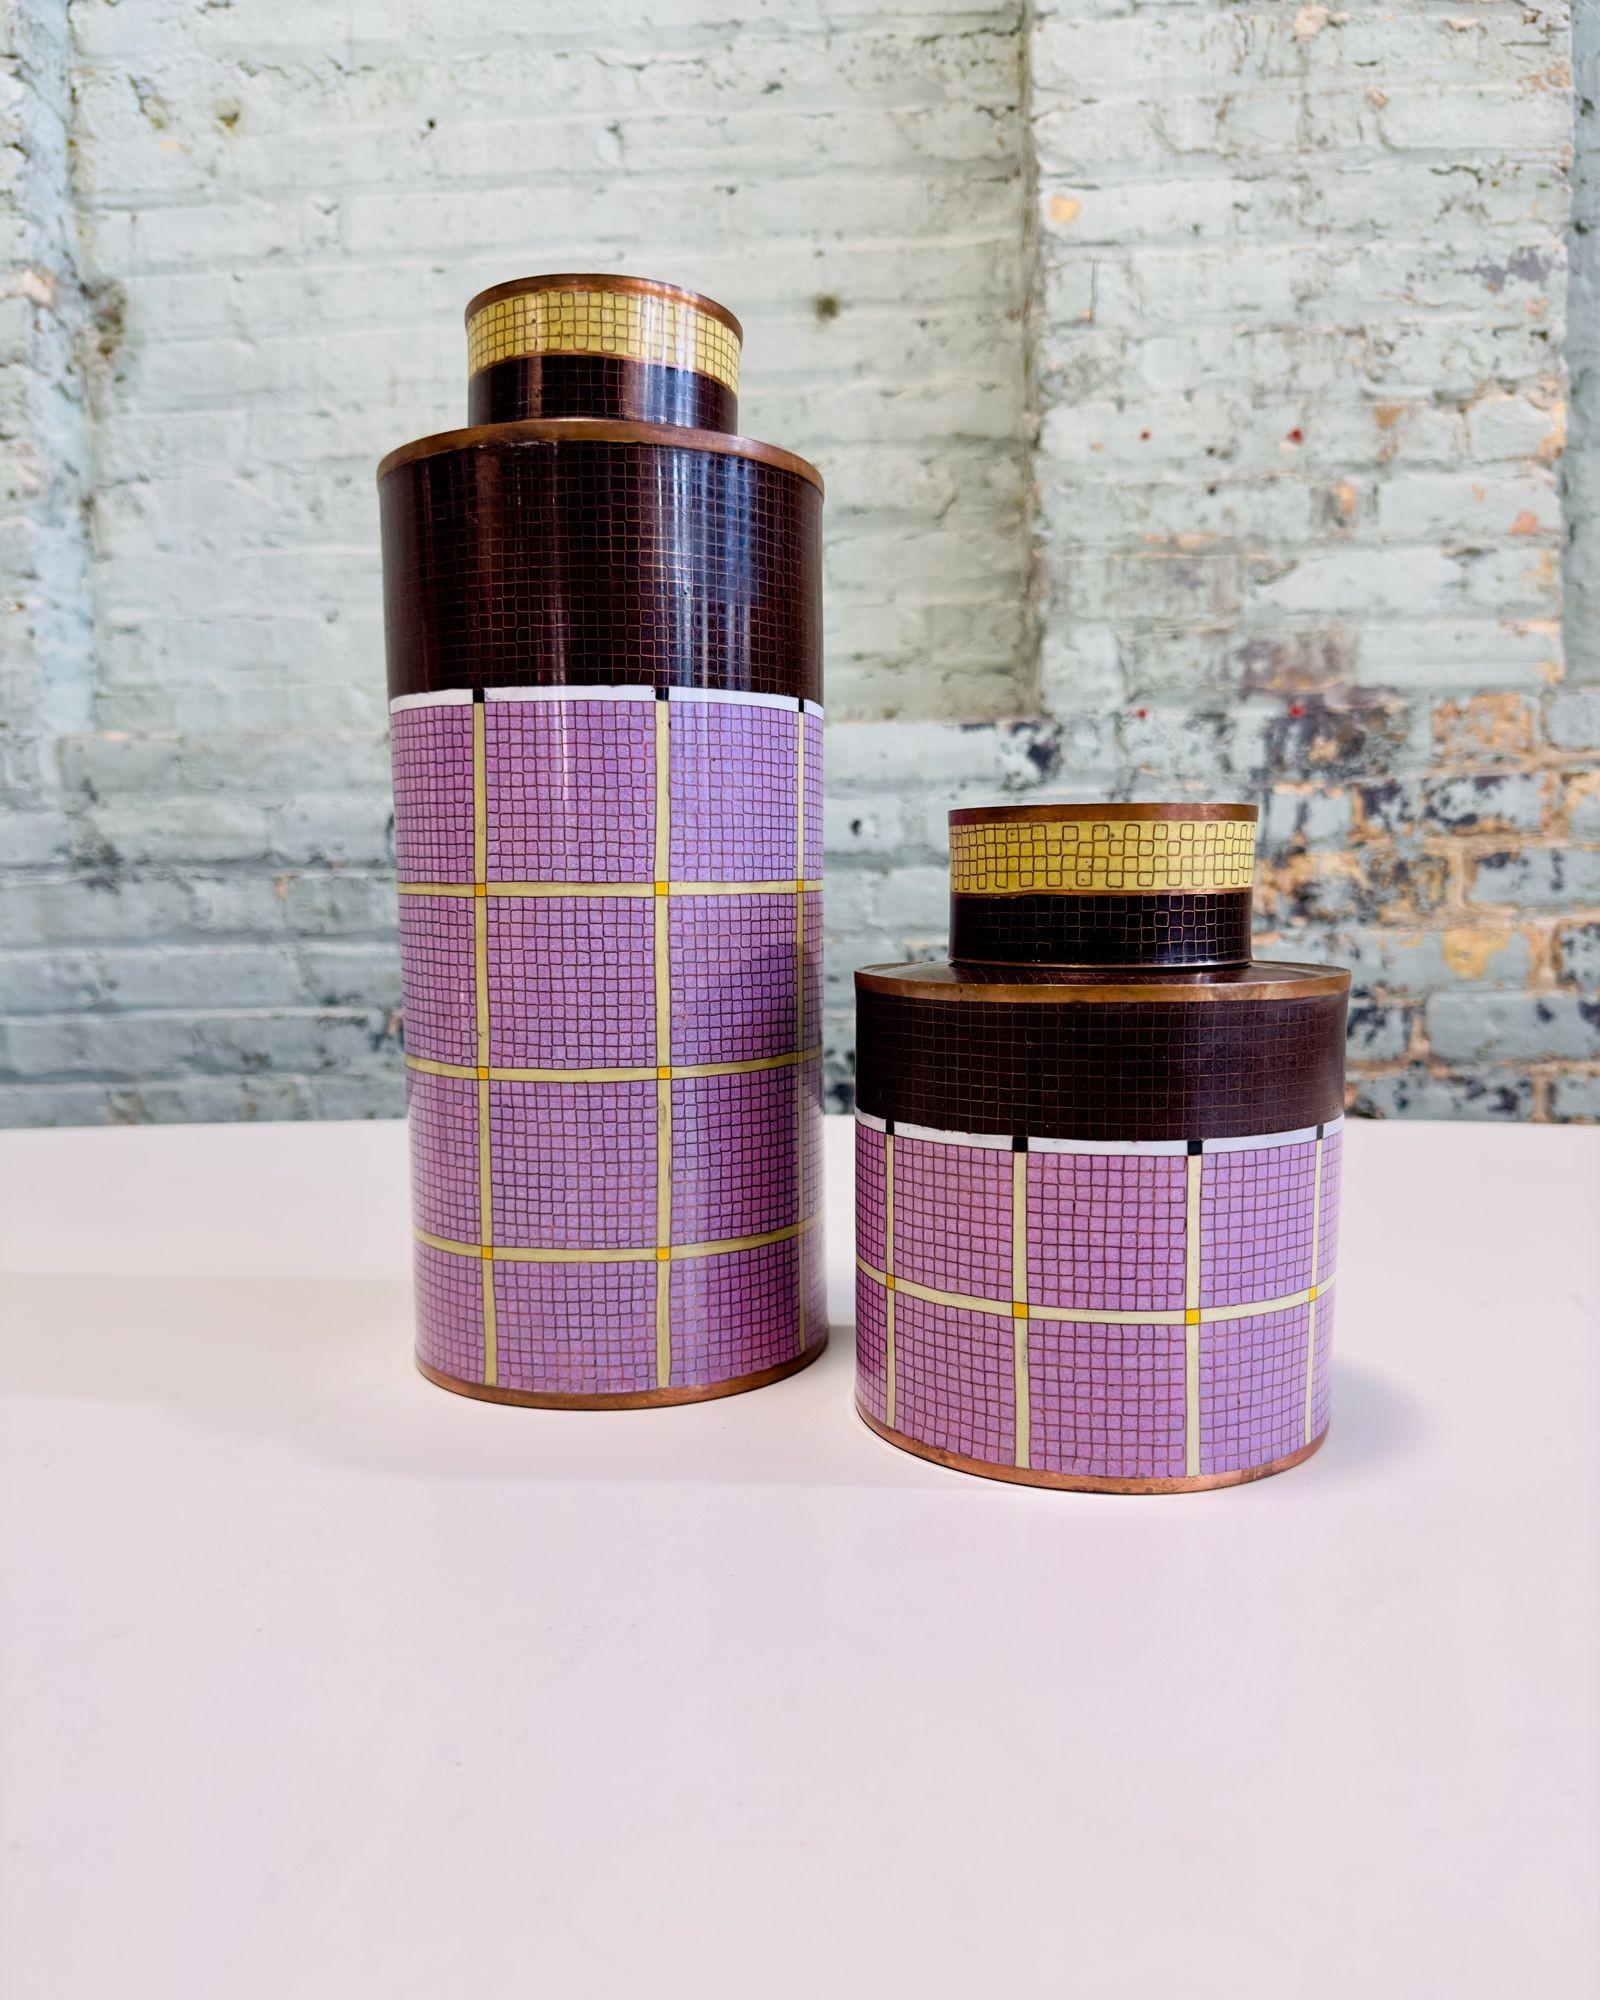  
Rare Pair Fabiennenn Jouvin Geometric enamel on copper Cloisonne Ginger Jars, 1970. Jars are enameled in brown, yellow and lavender design. Excellent condition.
The Fabienne Jouvin Geometric Cloisonné Ginger Jar is a product from Fabienne Jouvin,